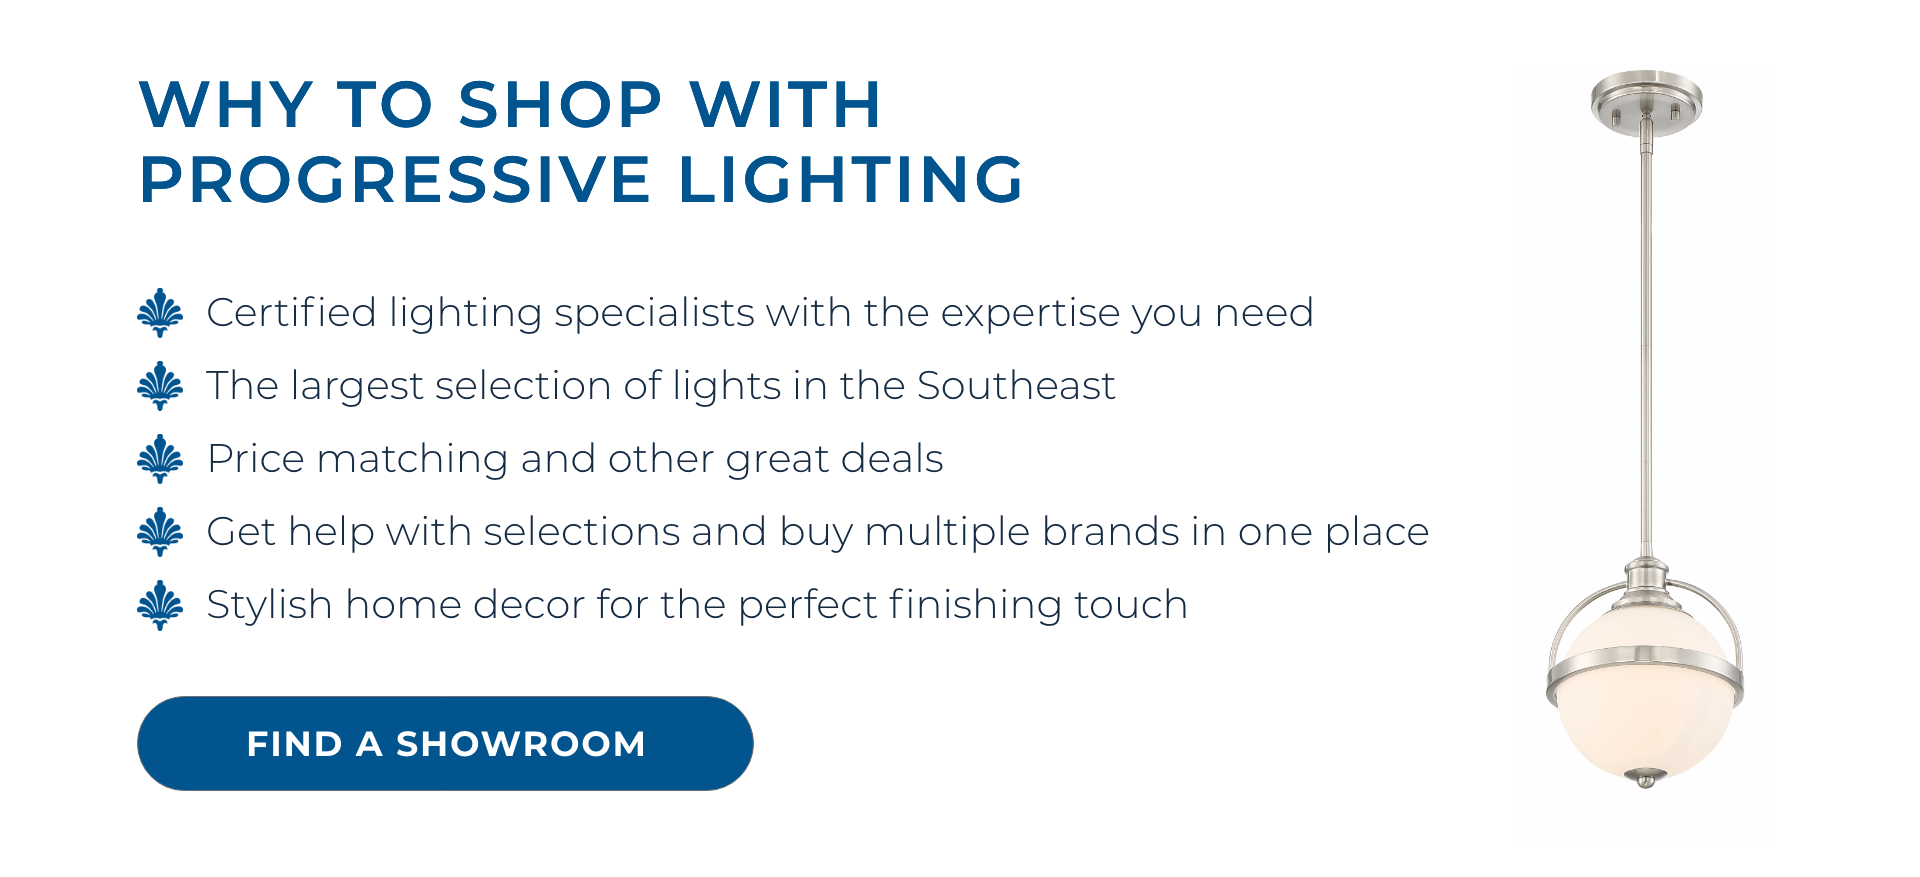 Why to shop with Progressive Lighting - expertise, selection and more